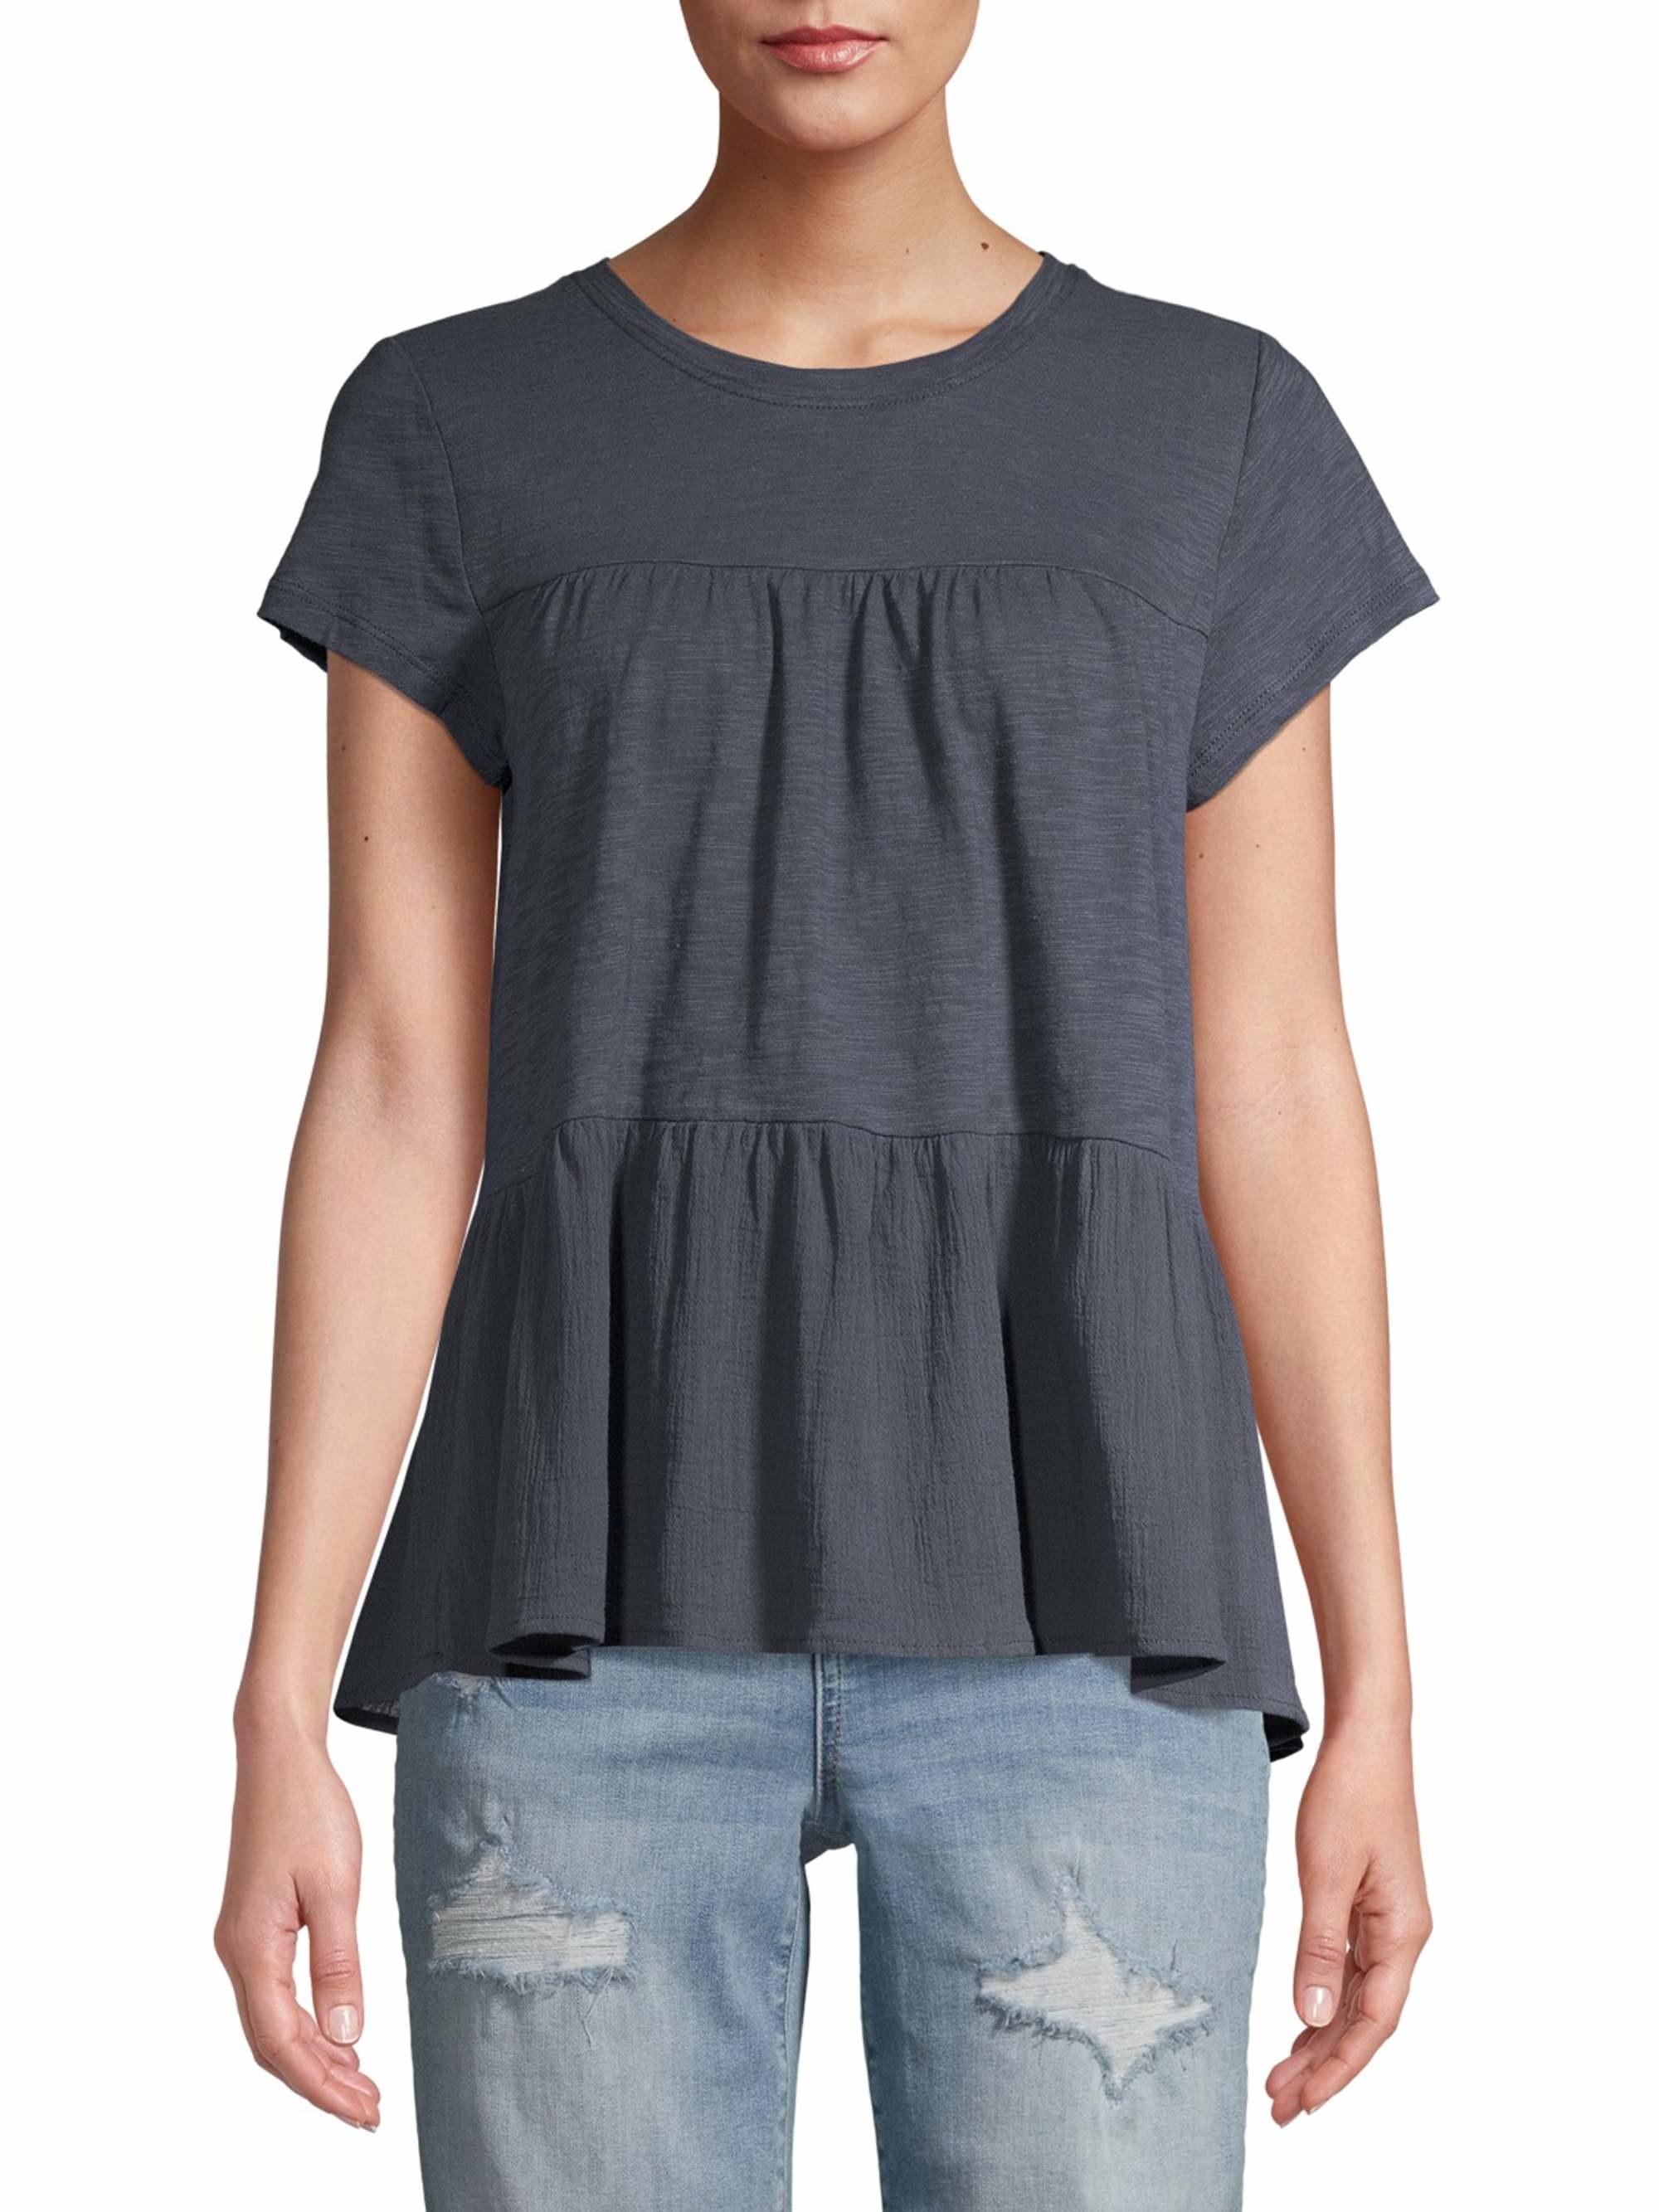 Model in a gray tiered t-shirt 